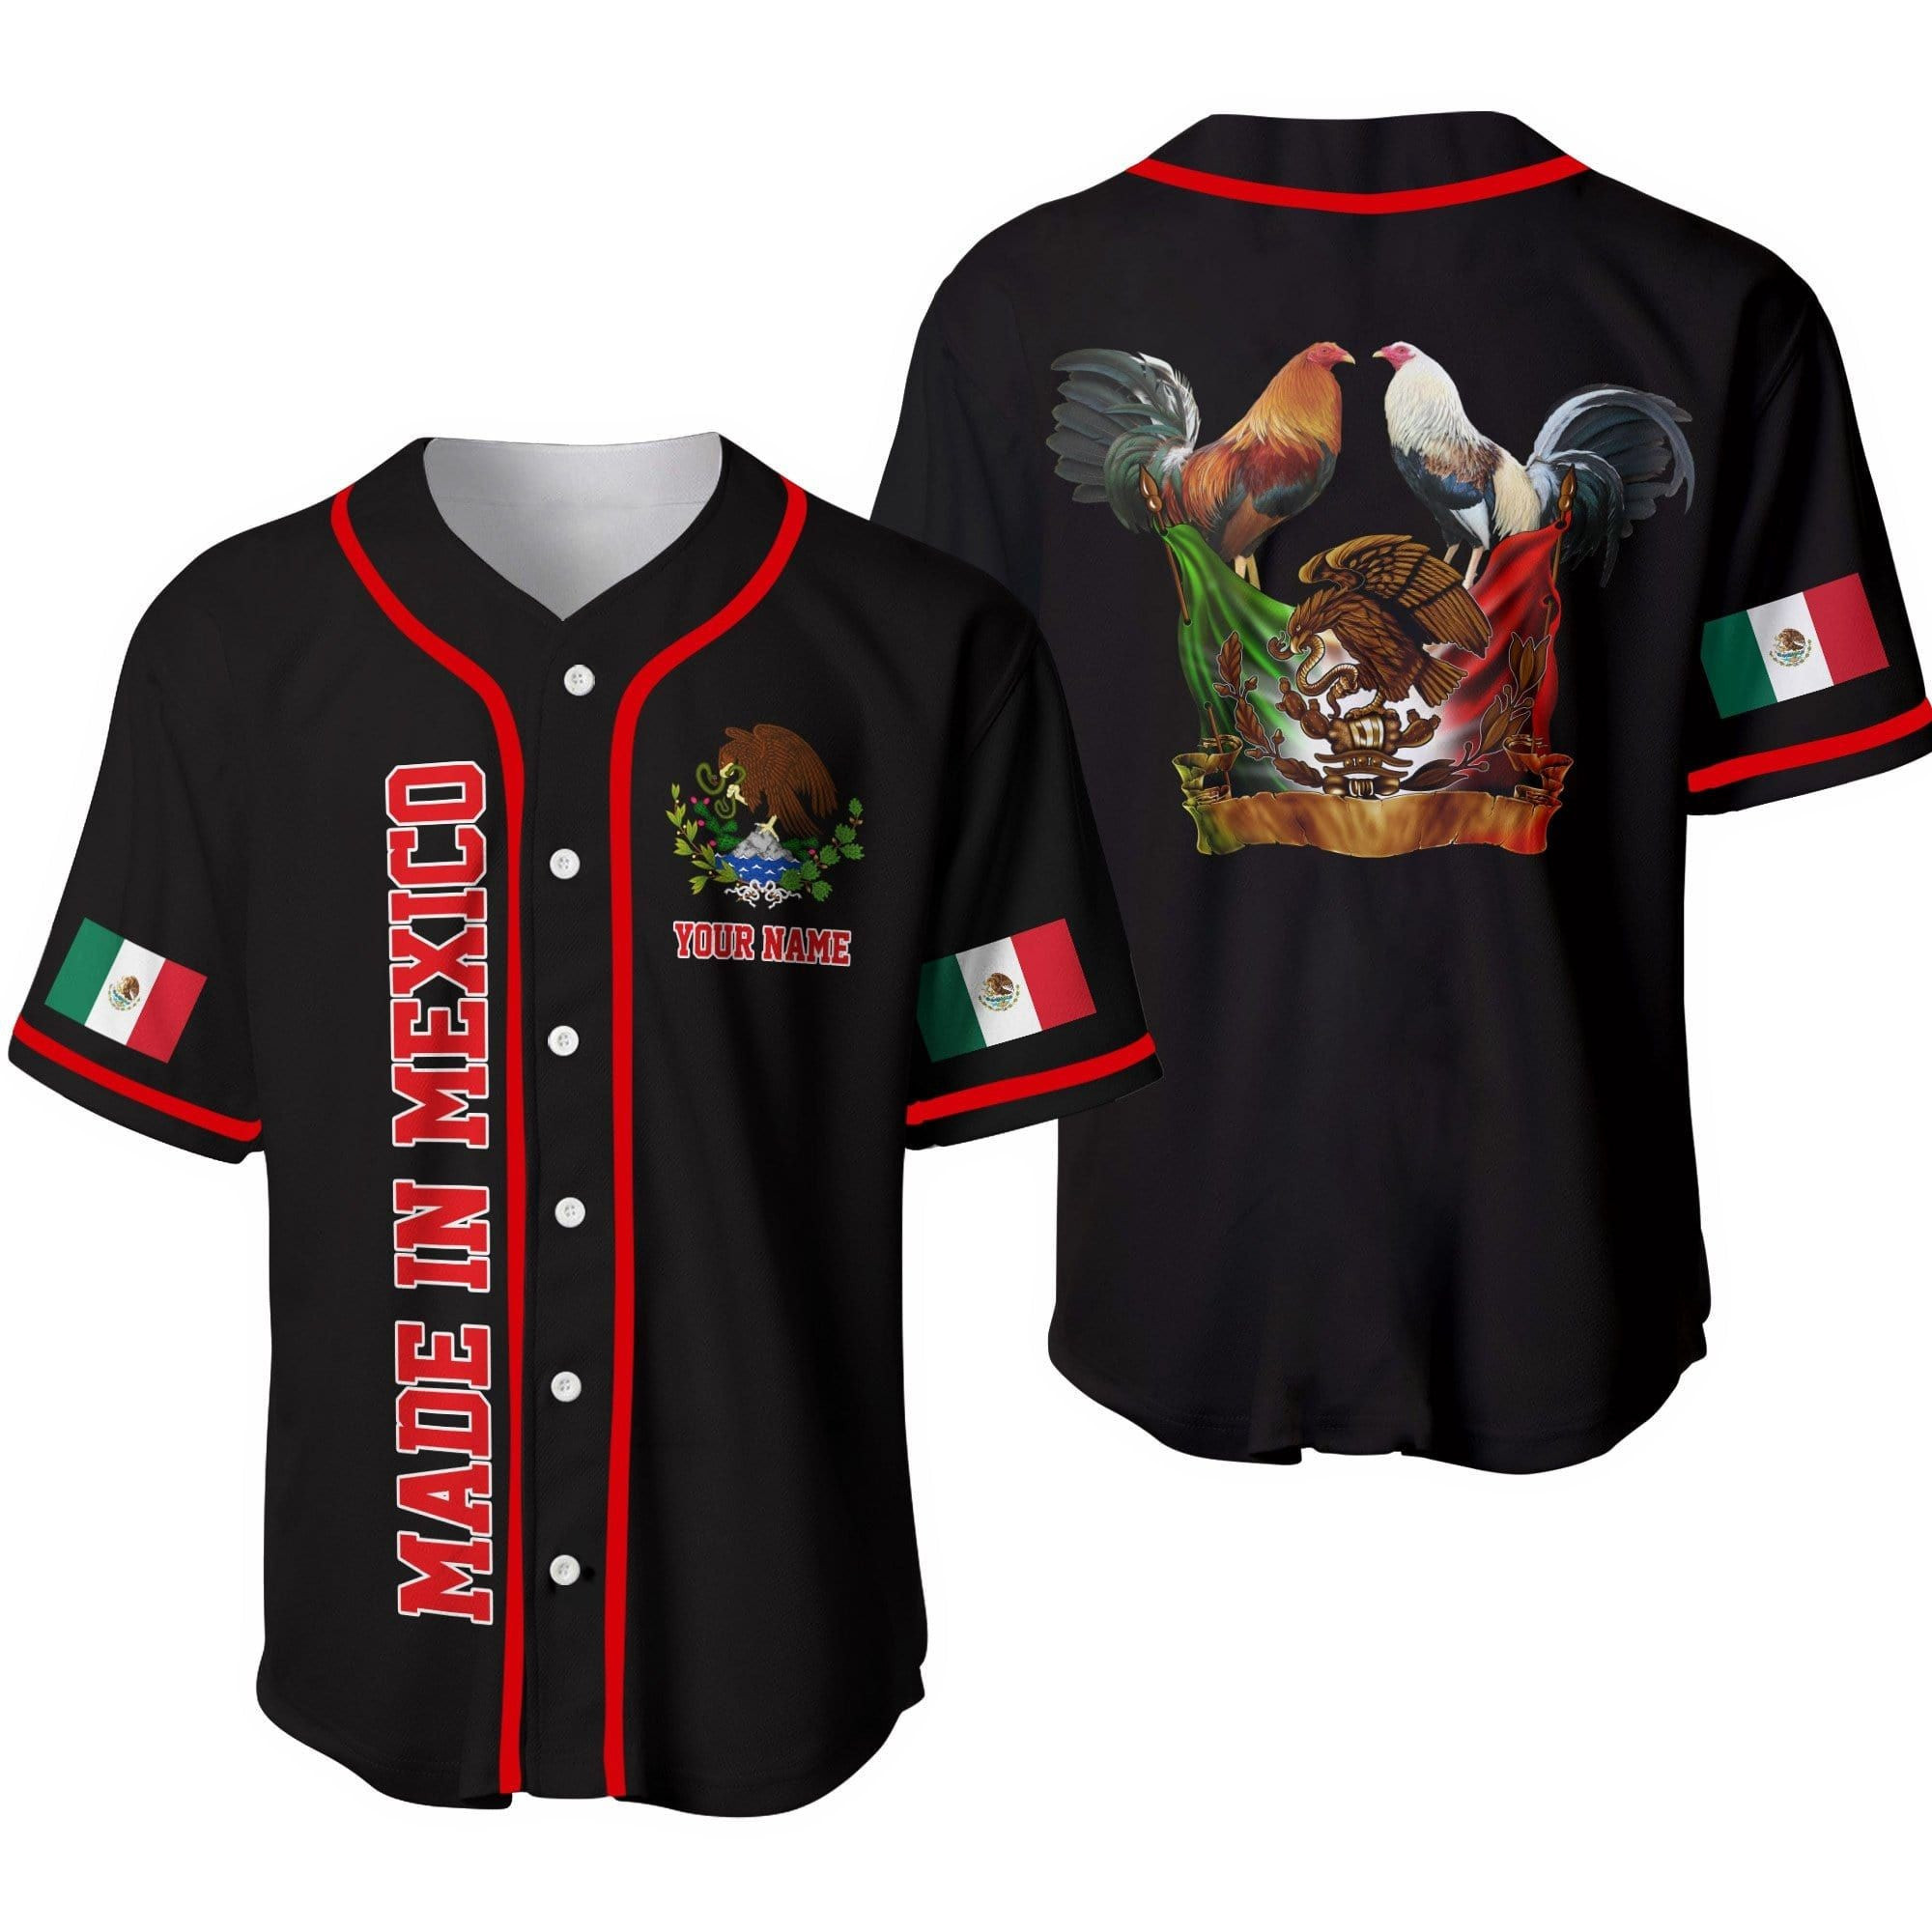 Made In Mexico Personalized Baseball Jersey